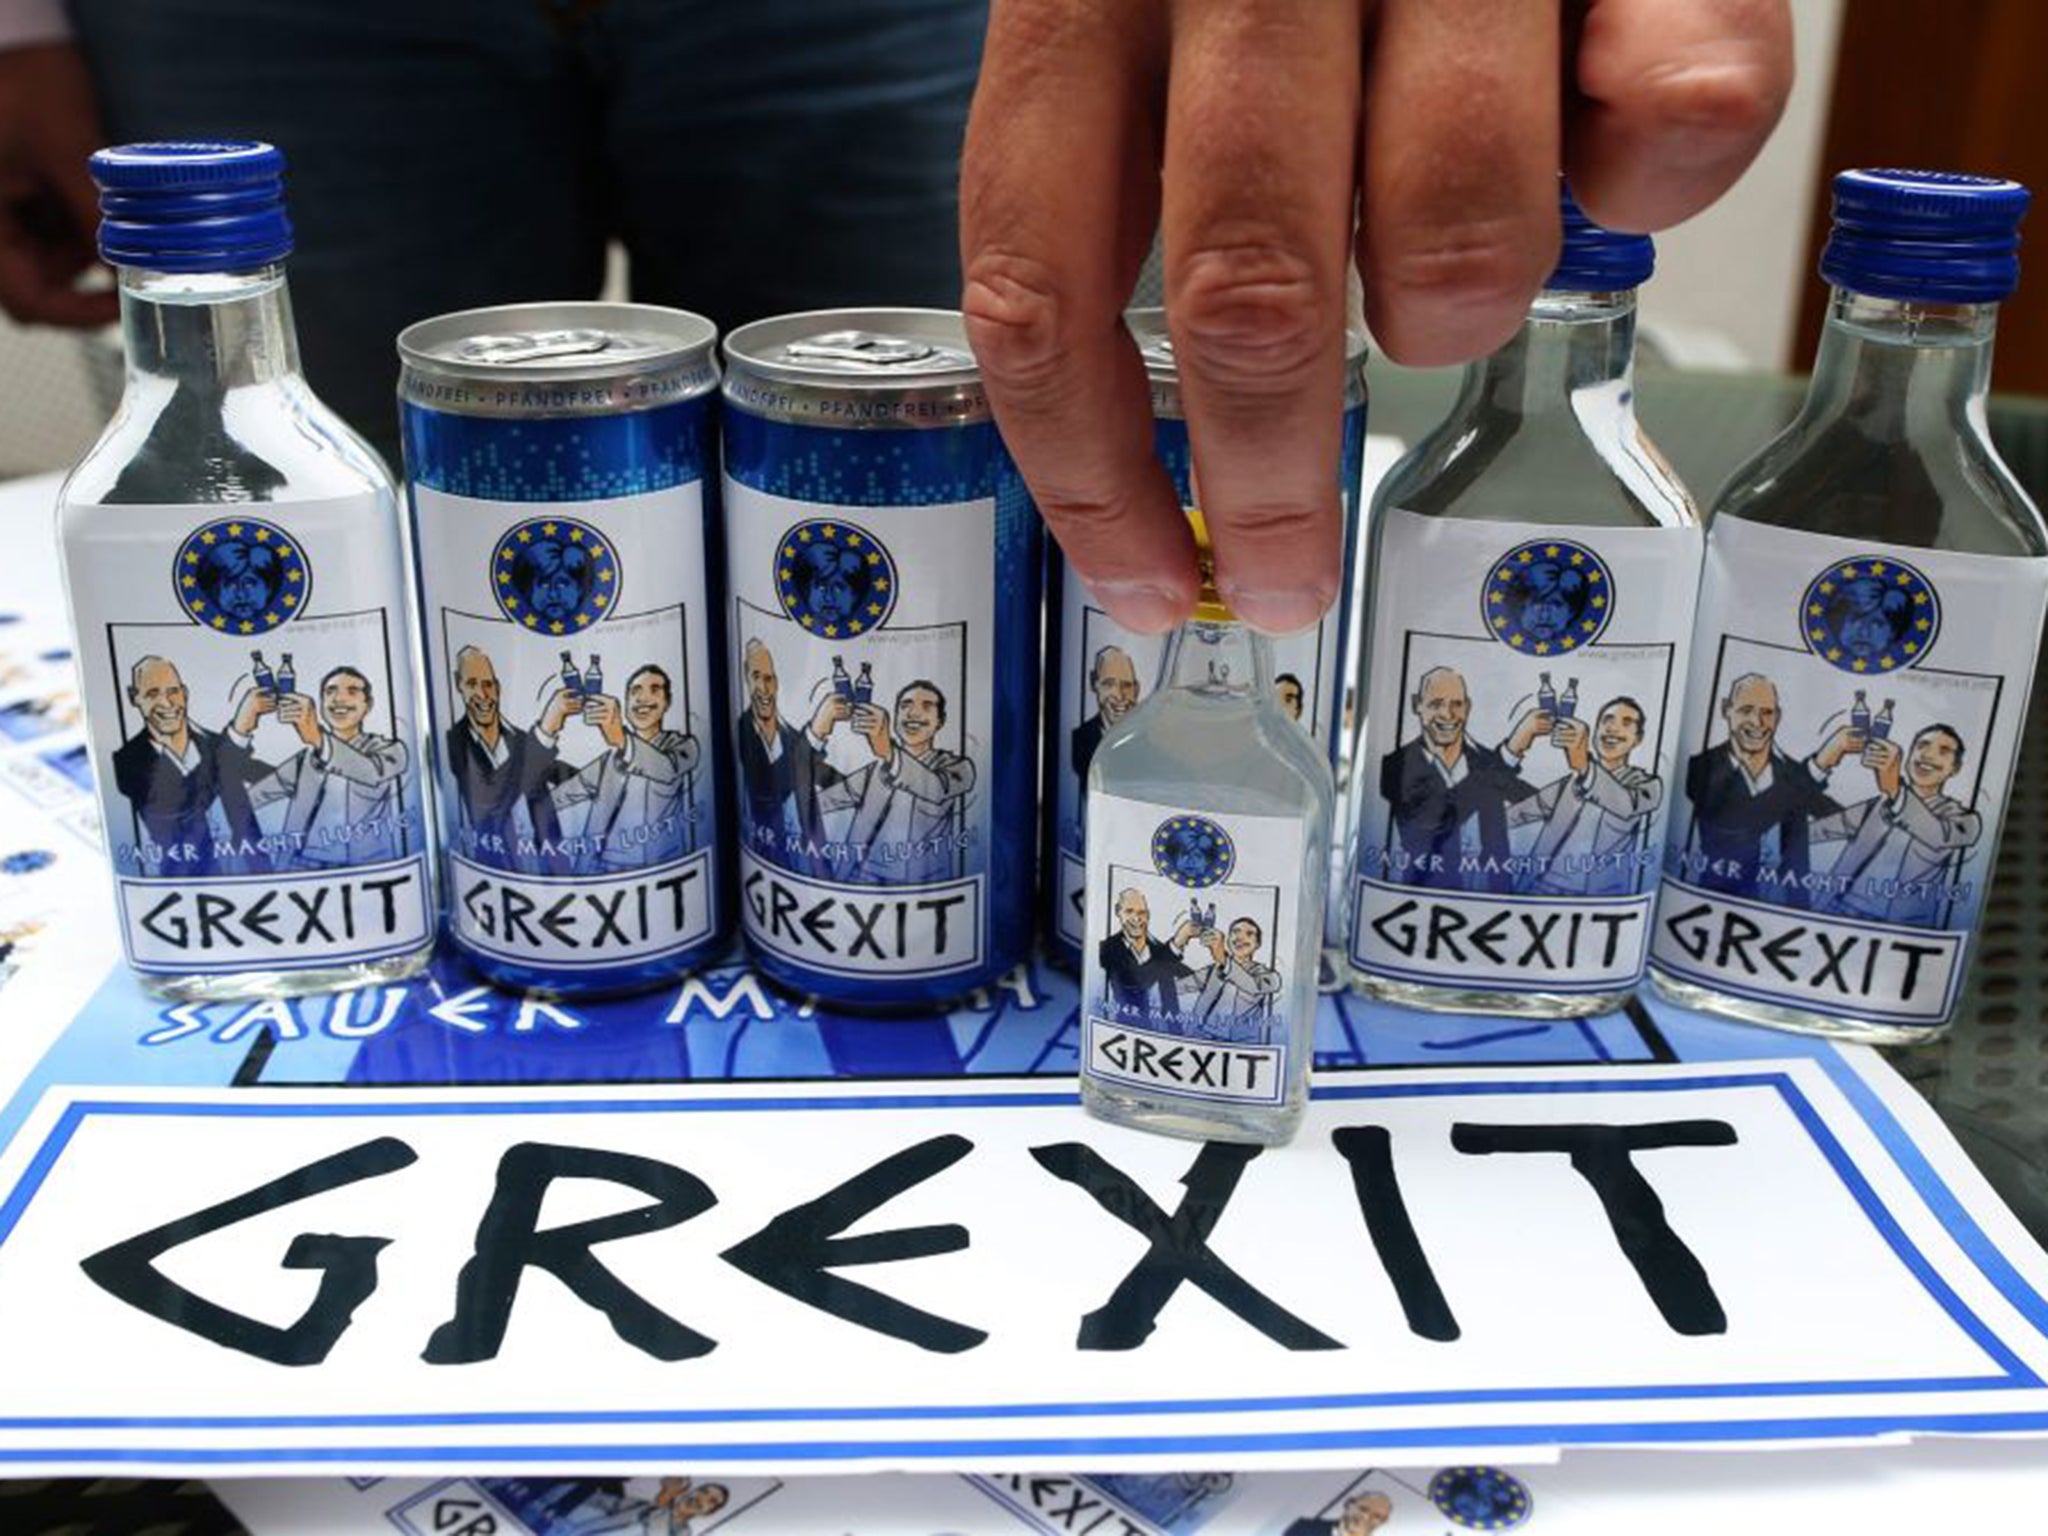 The possibility of Greece leaving the Eurozone is increasing by the day